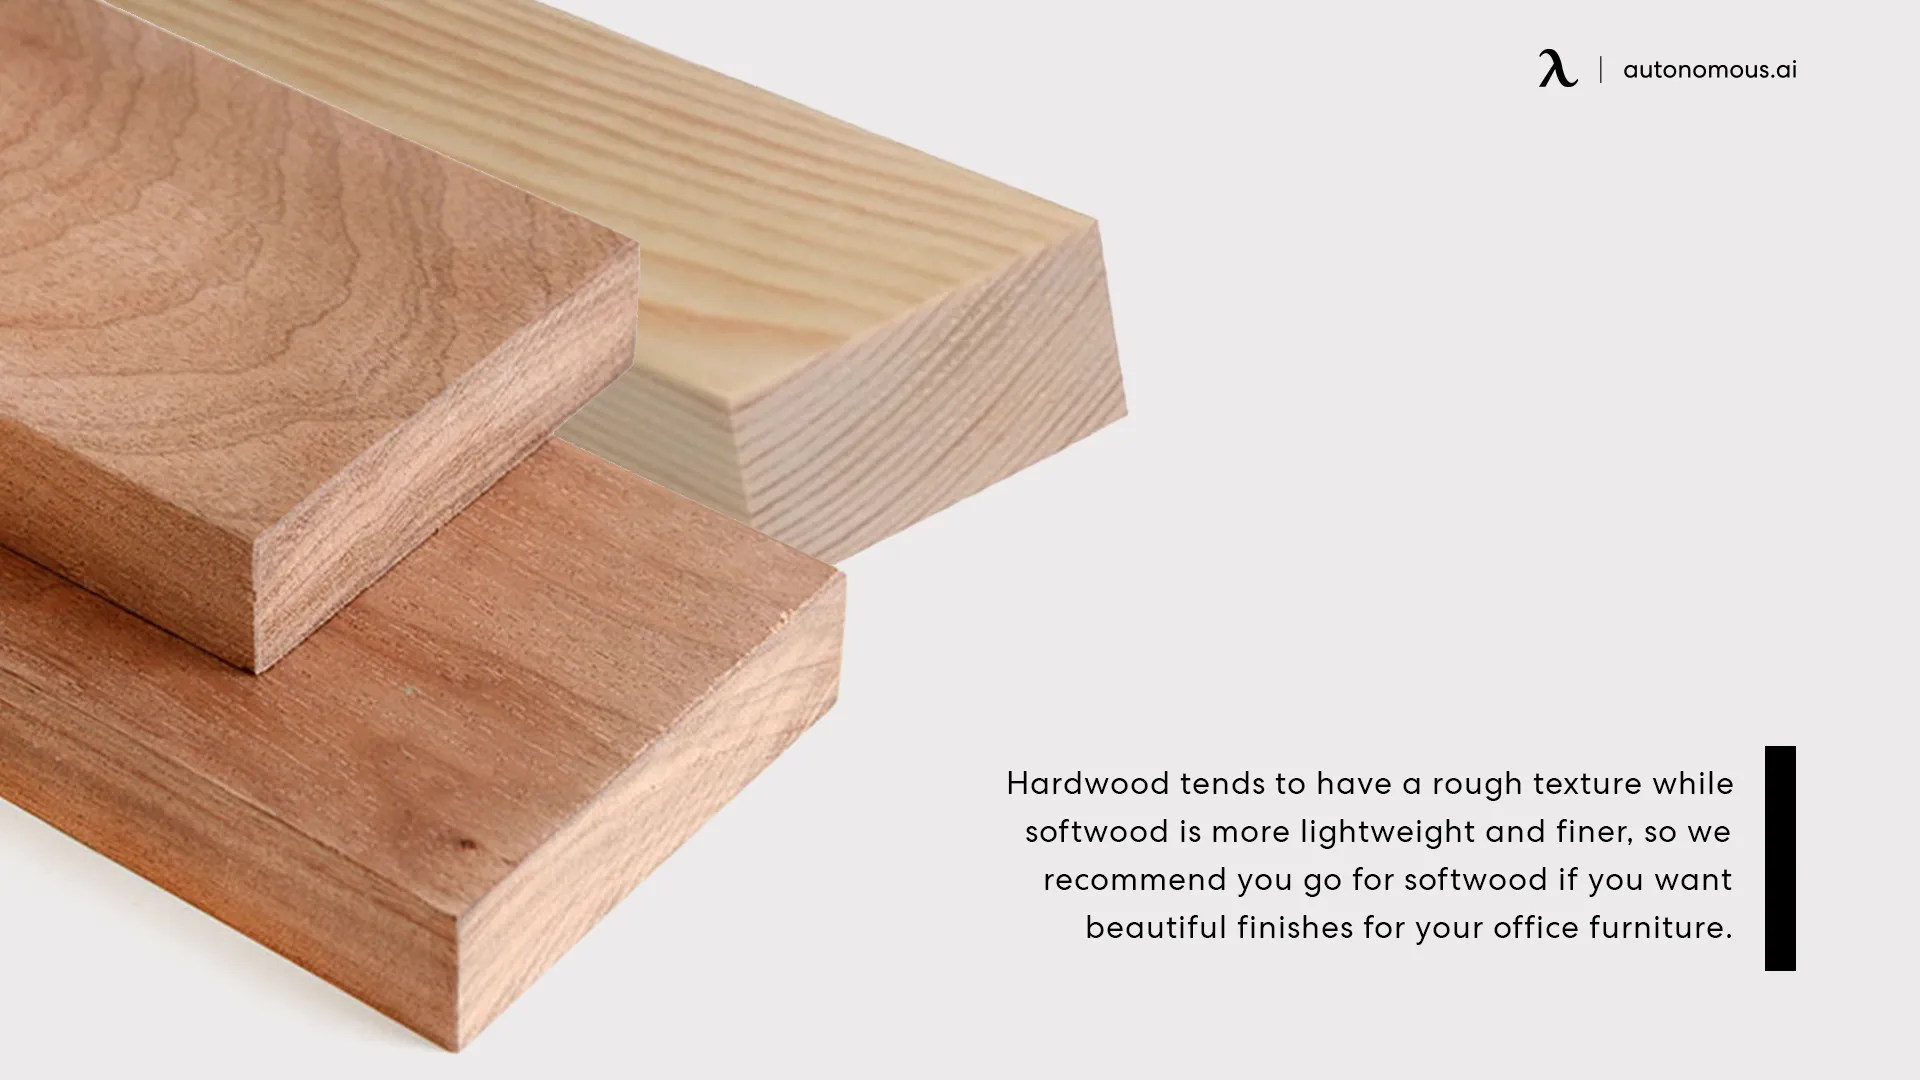 Differences Between Hardwood and Softwood